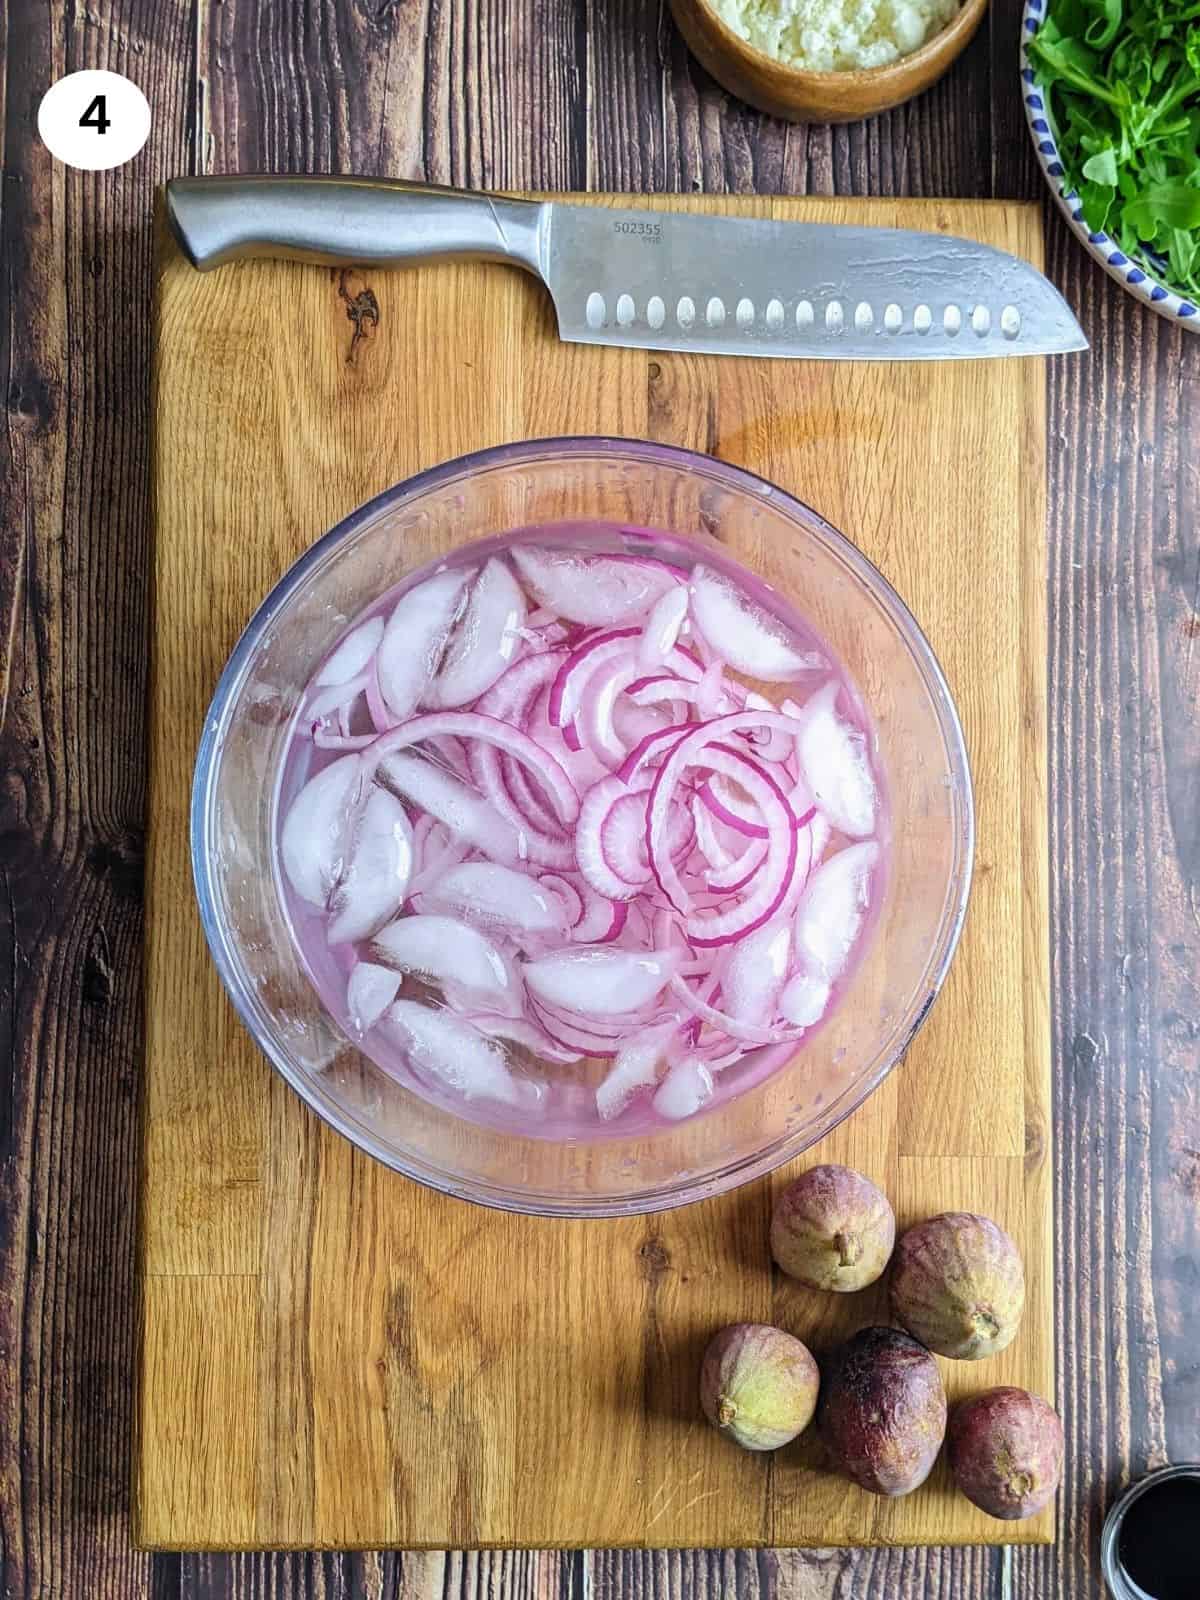 Onion slices in icy water.